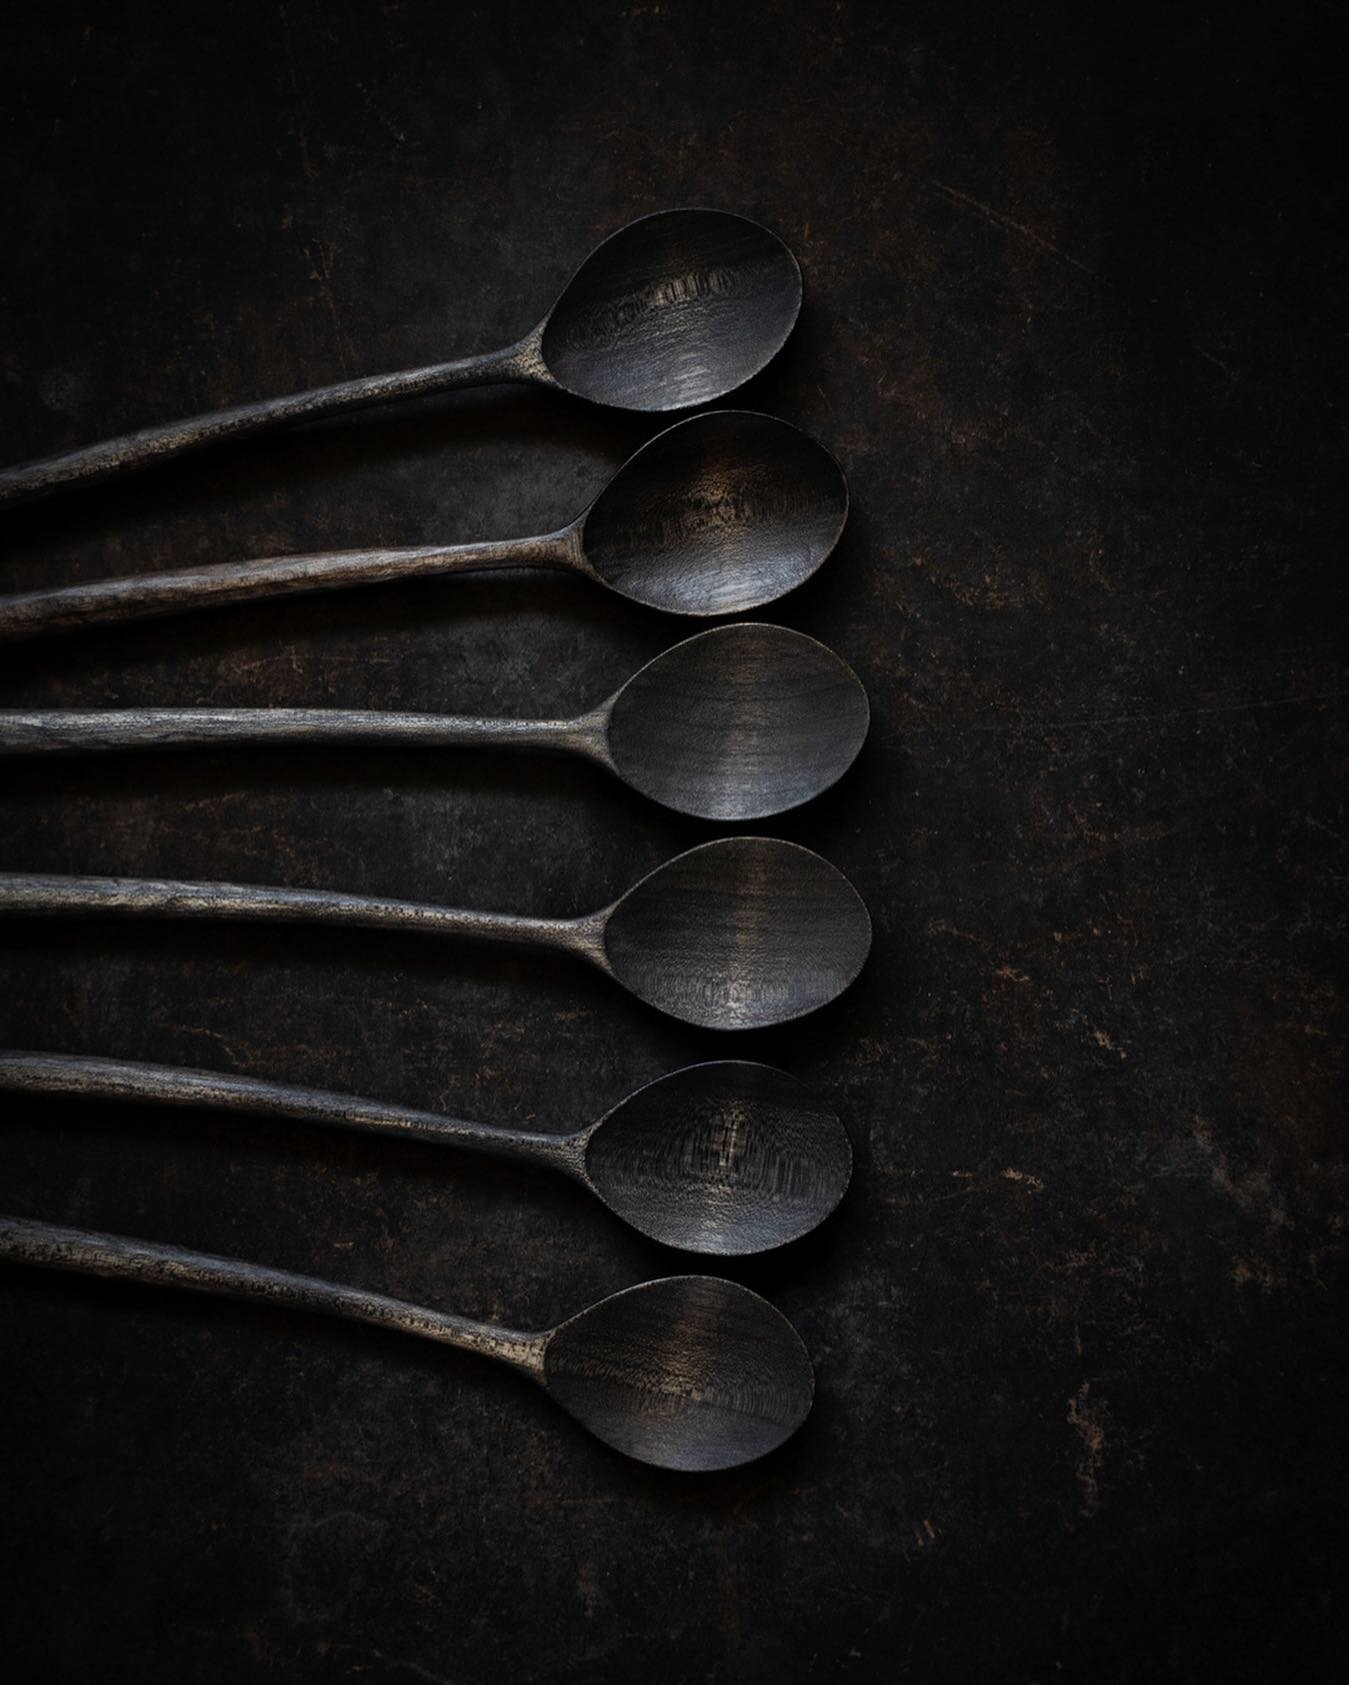 Six cherry spoons in a neat little row, dancing their way to the rainbow.